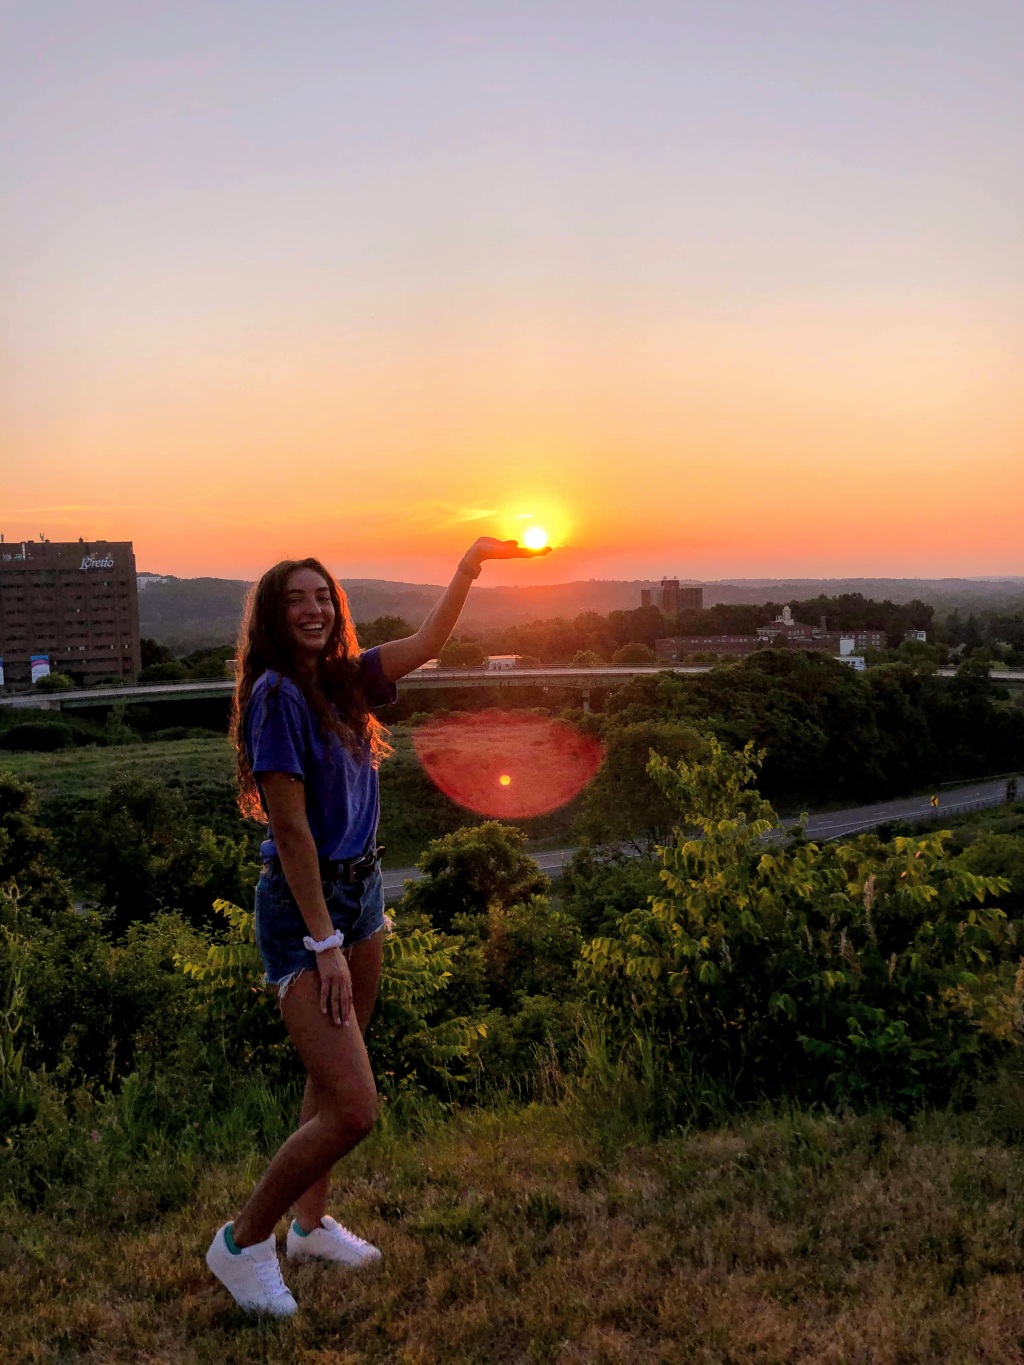 Where to Watch the Sunset in Syracuse, New York